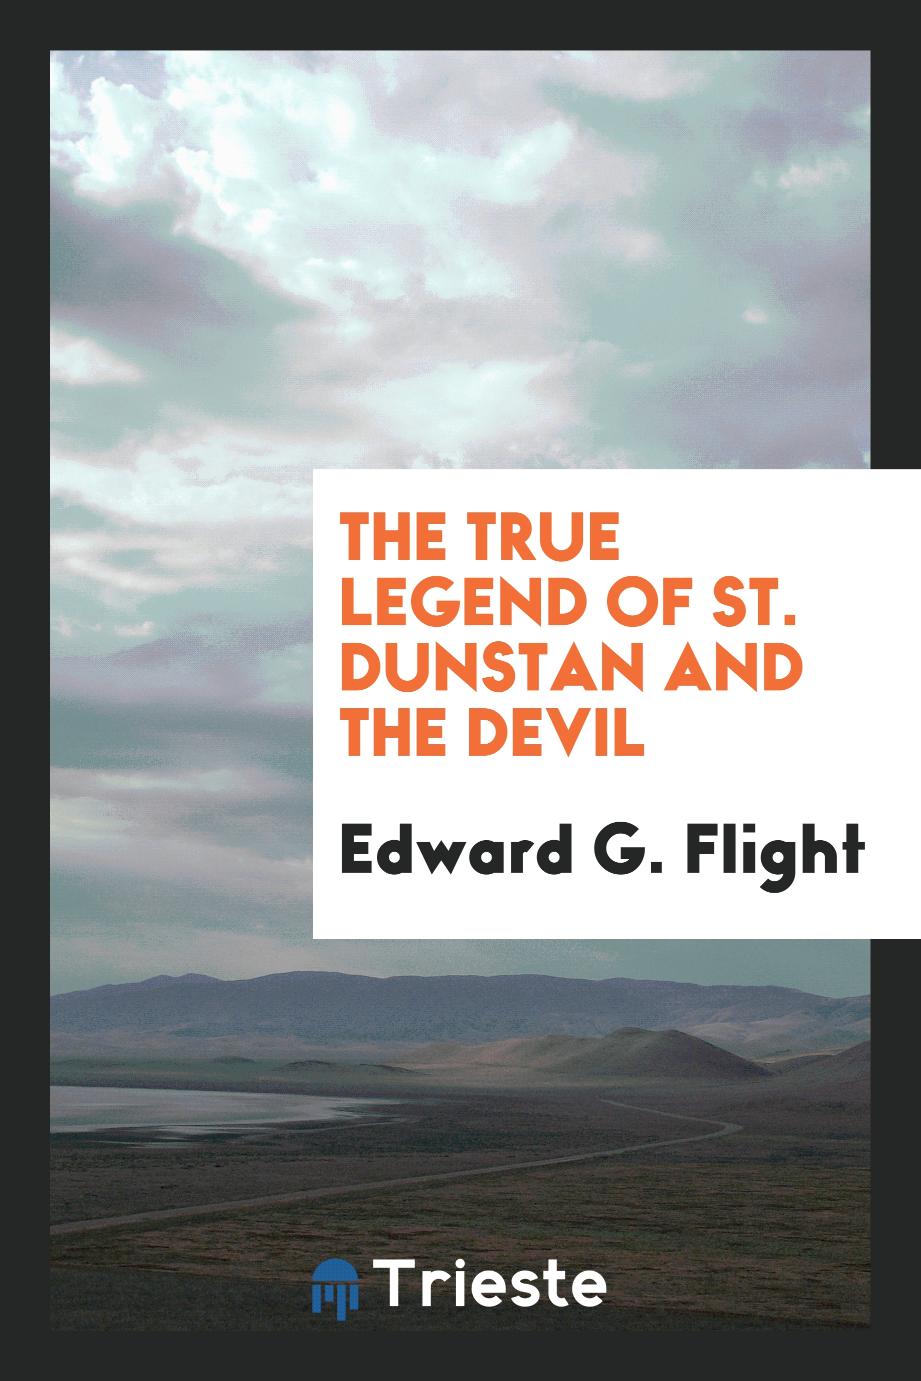 The true legend of St. Dunstan and the Devil